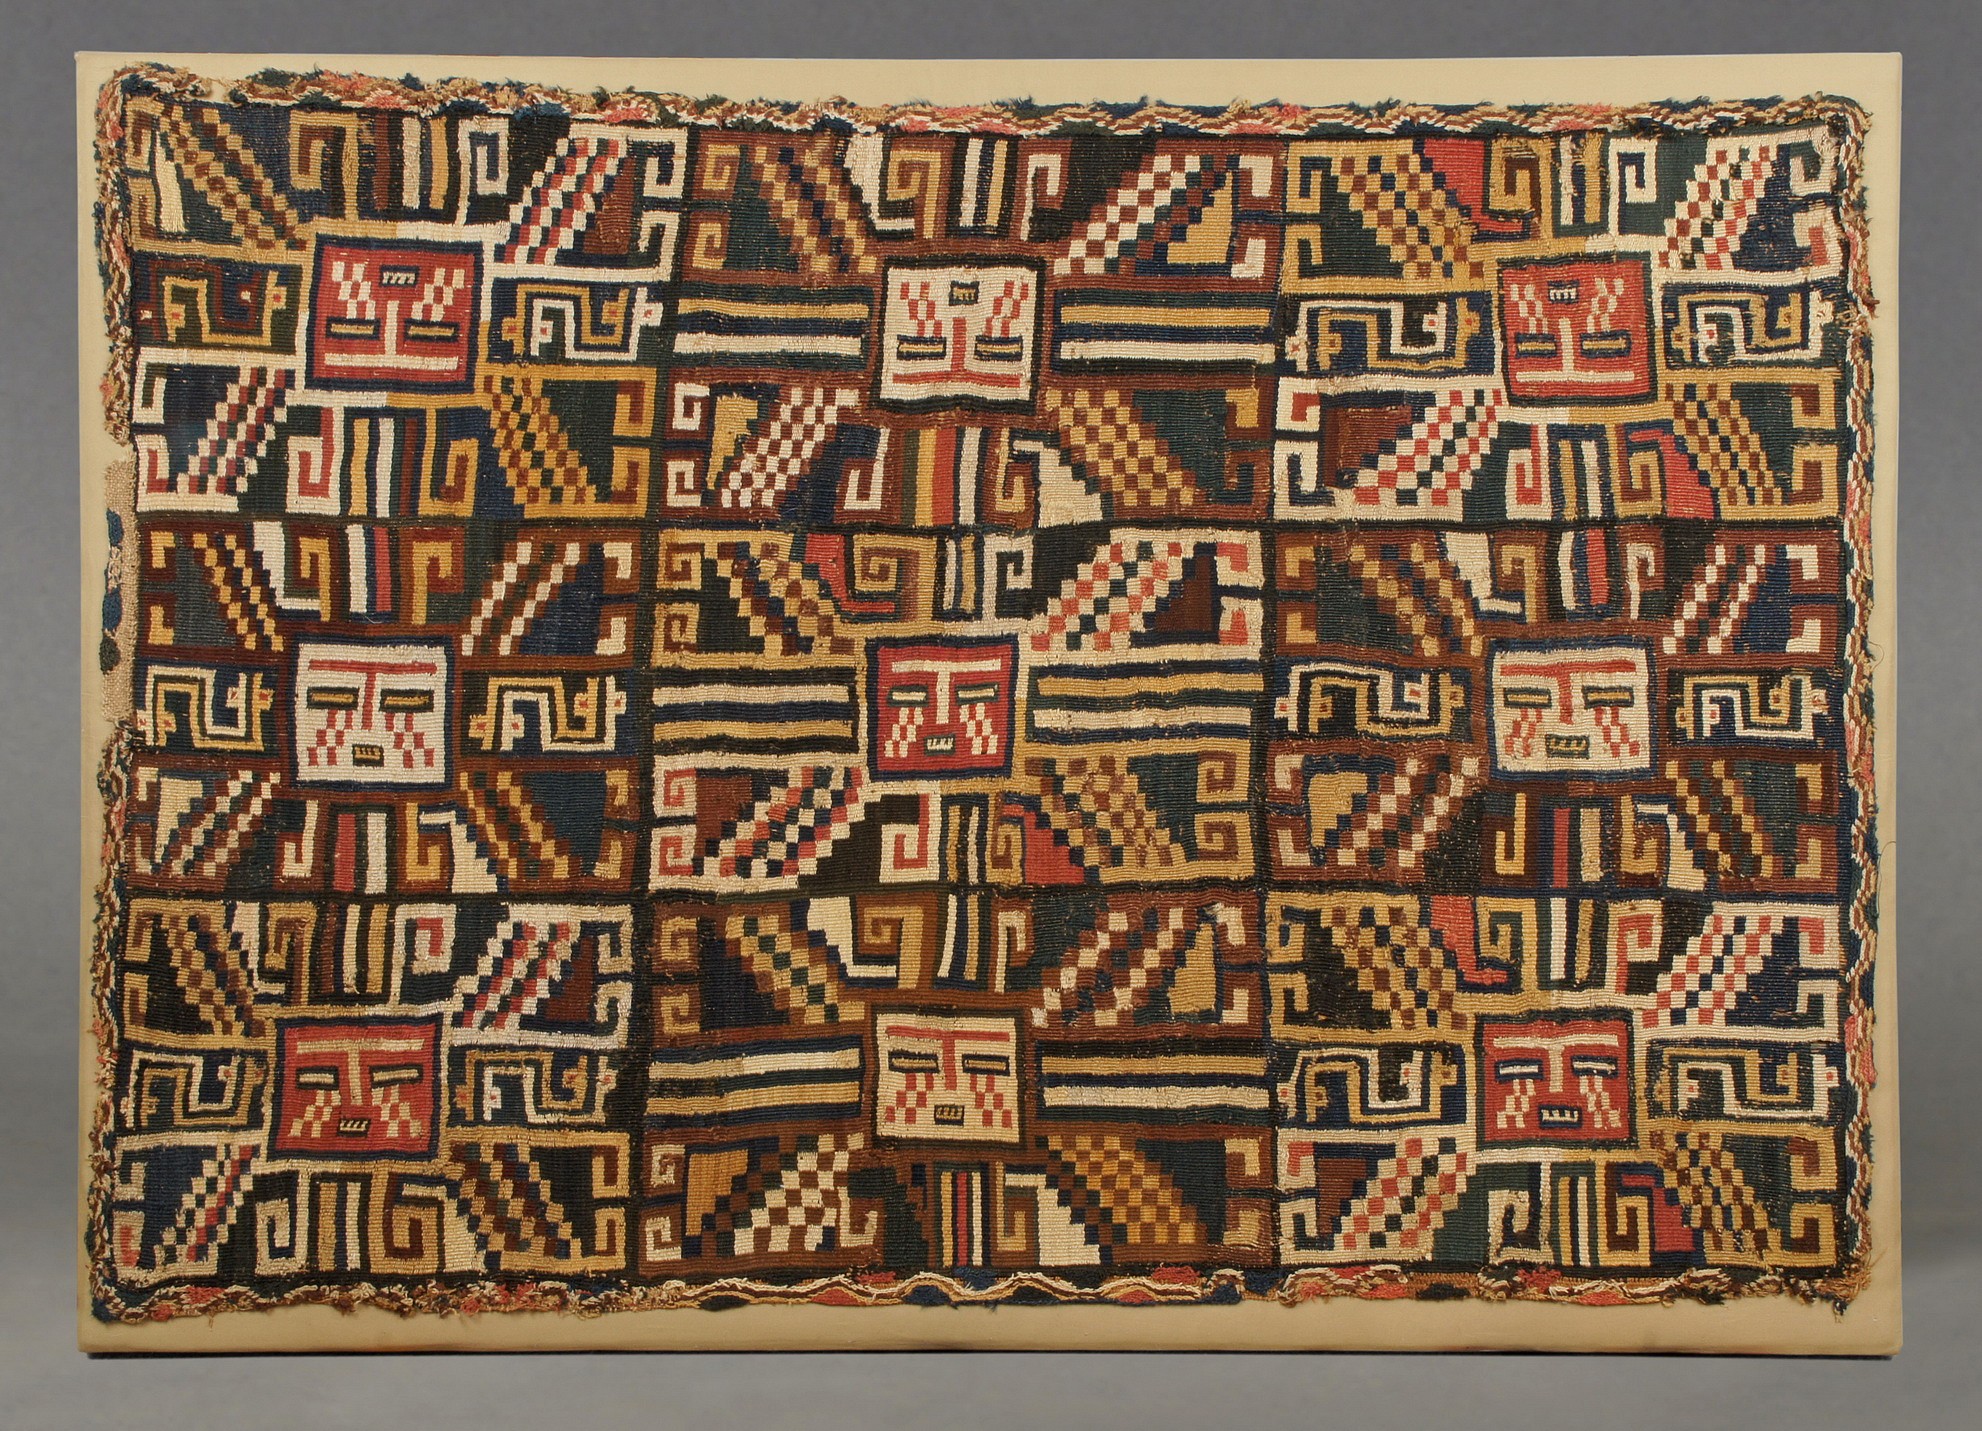 Peru, Sihuas Mantle with nine sun faces
The Sihuas sun face image was derived from the Tiwanaku Moon god. On this textile, the images are arranged  3 x 3 alternating in red and white sun faces. Rare double interlocking warp and weft with edges finished in the original pattern of a complicated oblique weave. According to Jorge Haeberle who has studied Sihuas textiles, this is one of only three known garments of this type. He thinks it was a head cloth with the opposing row of faces folded over from front to back showing the sun faces right side up on the front of the forehead. This weaving is very complicated and from the earliest Sihuas phase around 300 - 100 BC. There have been several larger Sijuas textiles with just a single sun face, while this one with the rows of faces compares to or perhaps influenced early known Tiwanaku and Pucuara weavings. The Sihuas complex of weaving began about 500 BC and was contemporany with Paracas embroideries. The Sihuas culture was eventually absorbed by the Nazca in the seventh century.
Media: Textile
Dimensions: 37 1/2" x 46"
Price Upon Request
MM801